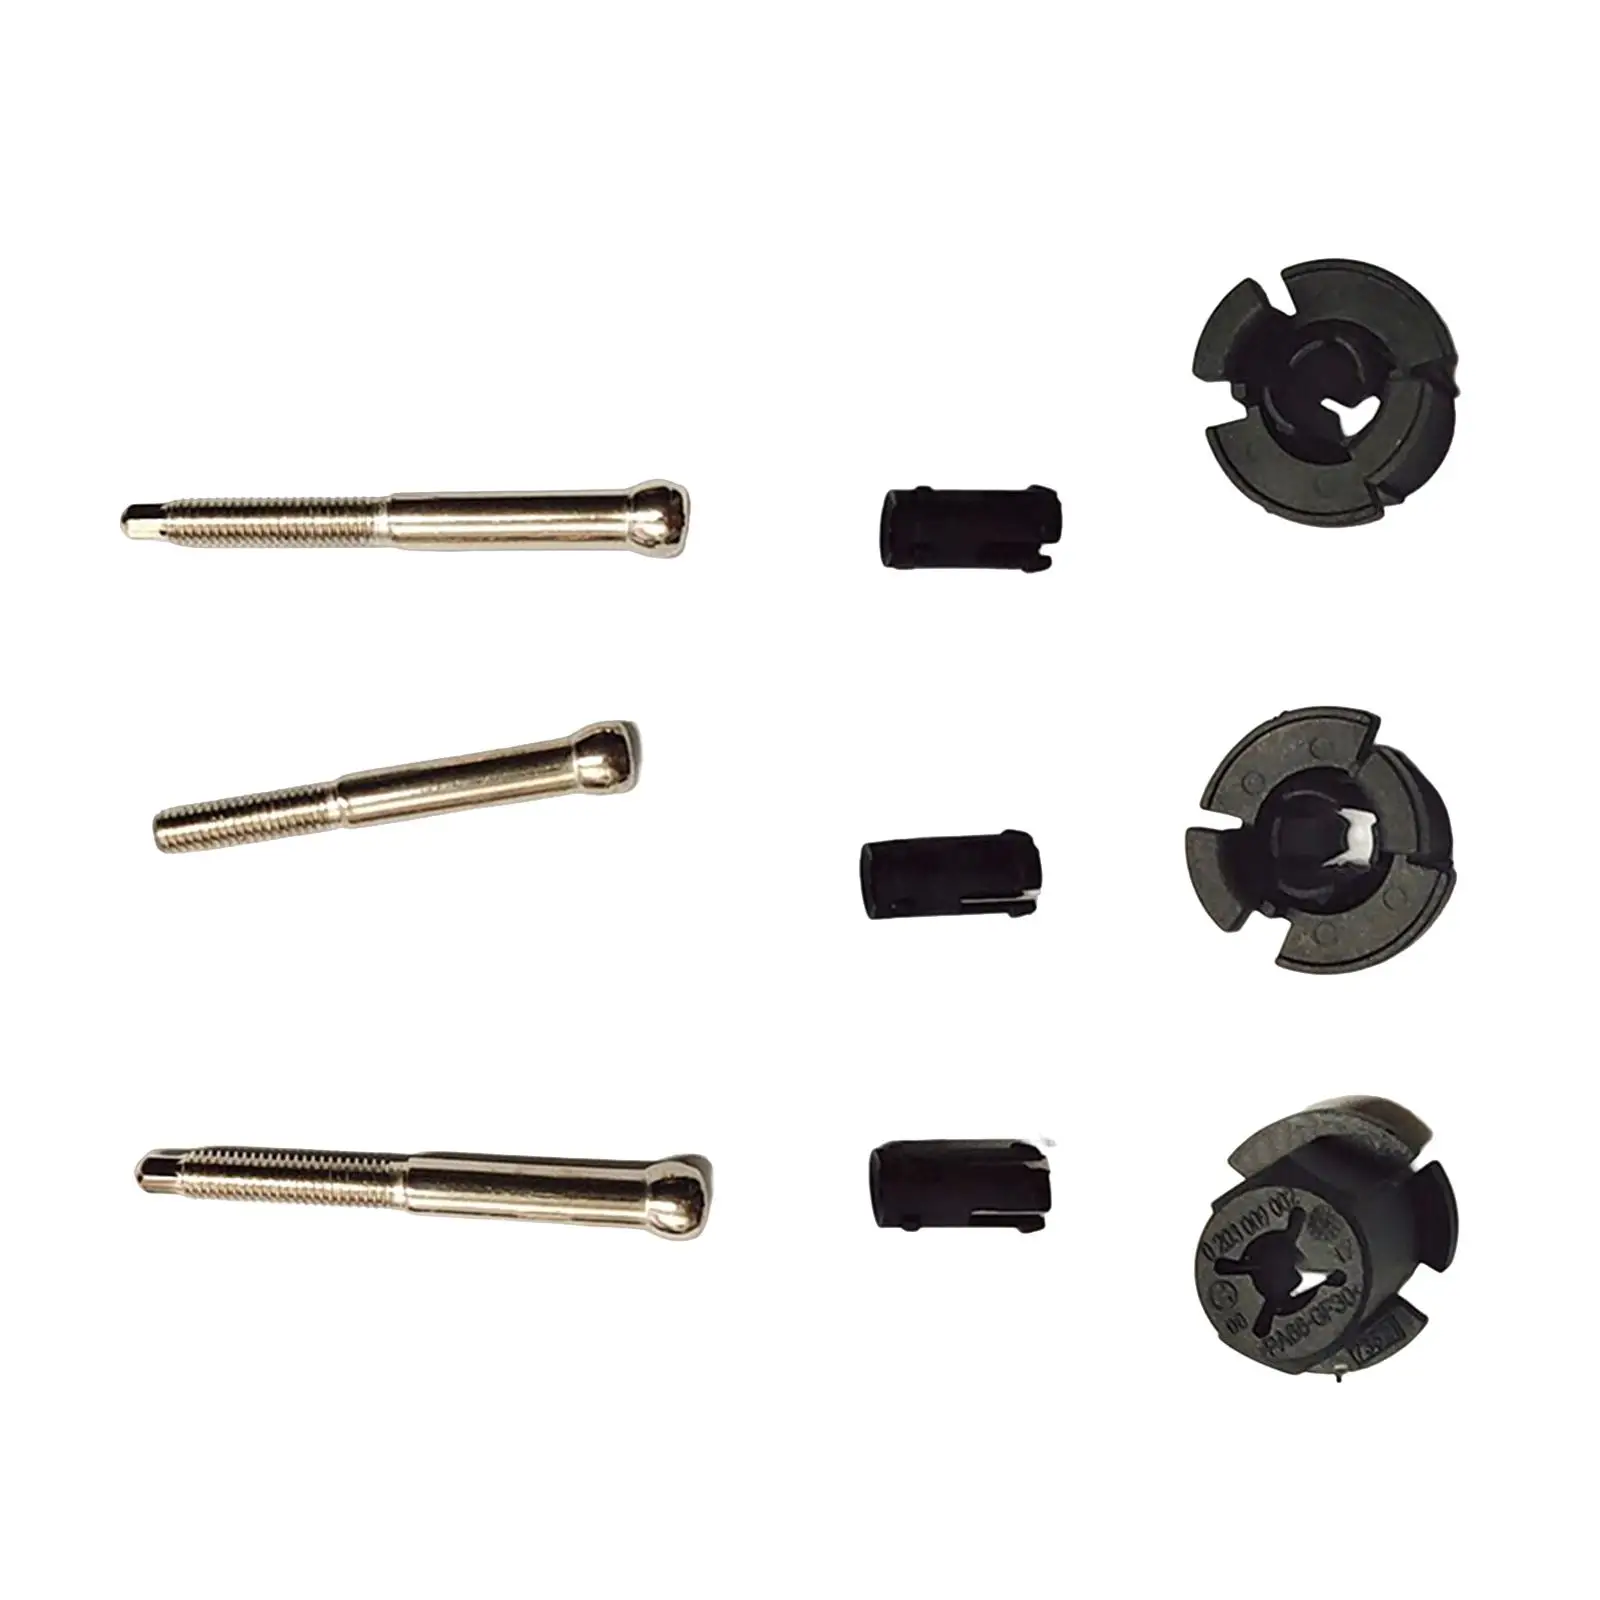 Control System Distance Sensor Hardware Kit Replaces Accessory Easy to Install